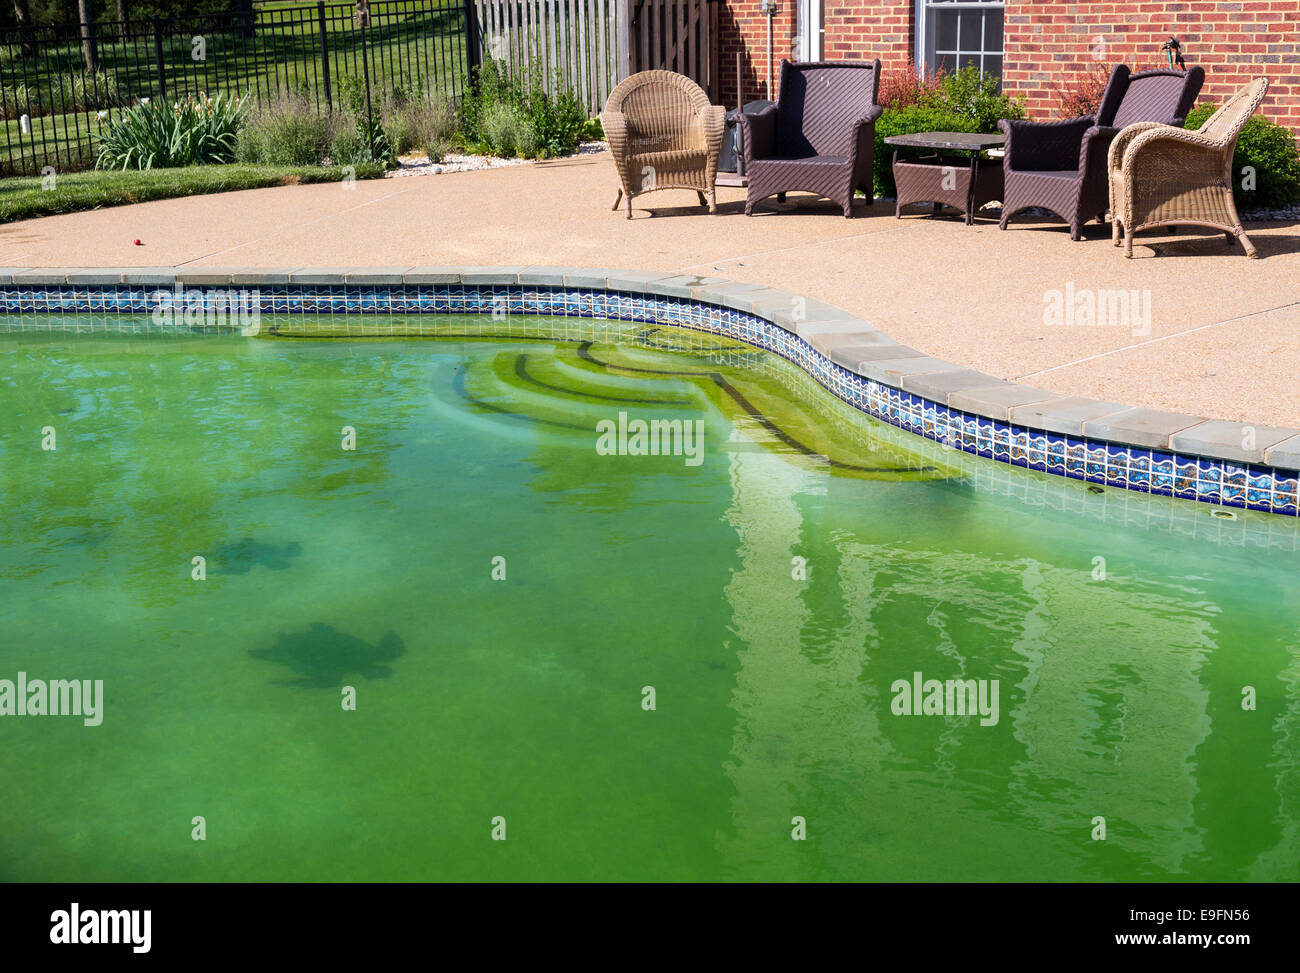 Filthy backyard swimming pool and patio Stock Photo